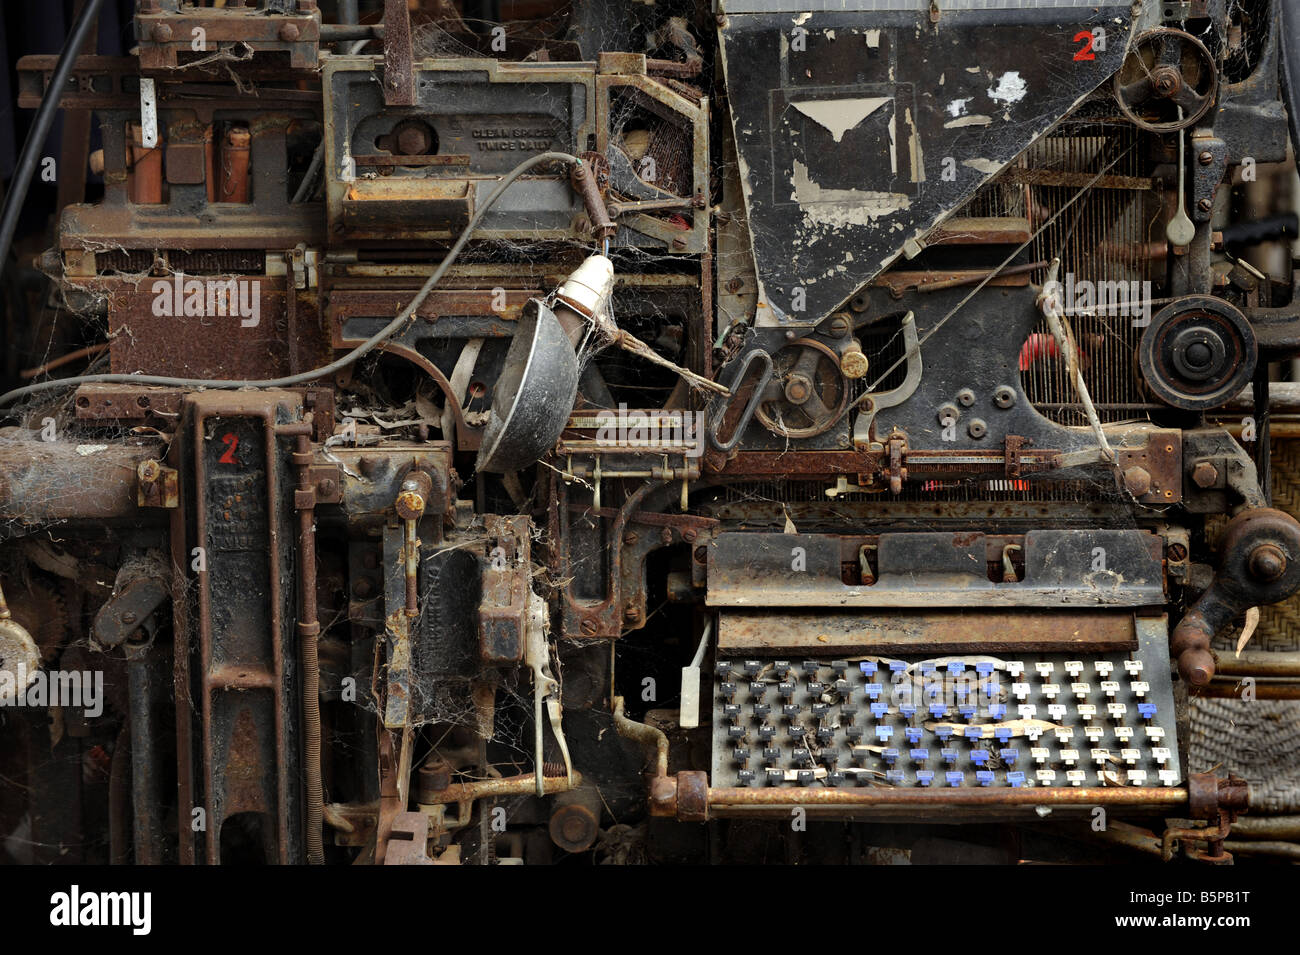 An old Linotype machine used in printing sits rusting in a vacant lot. Stock Photo